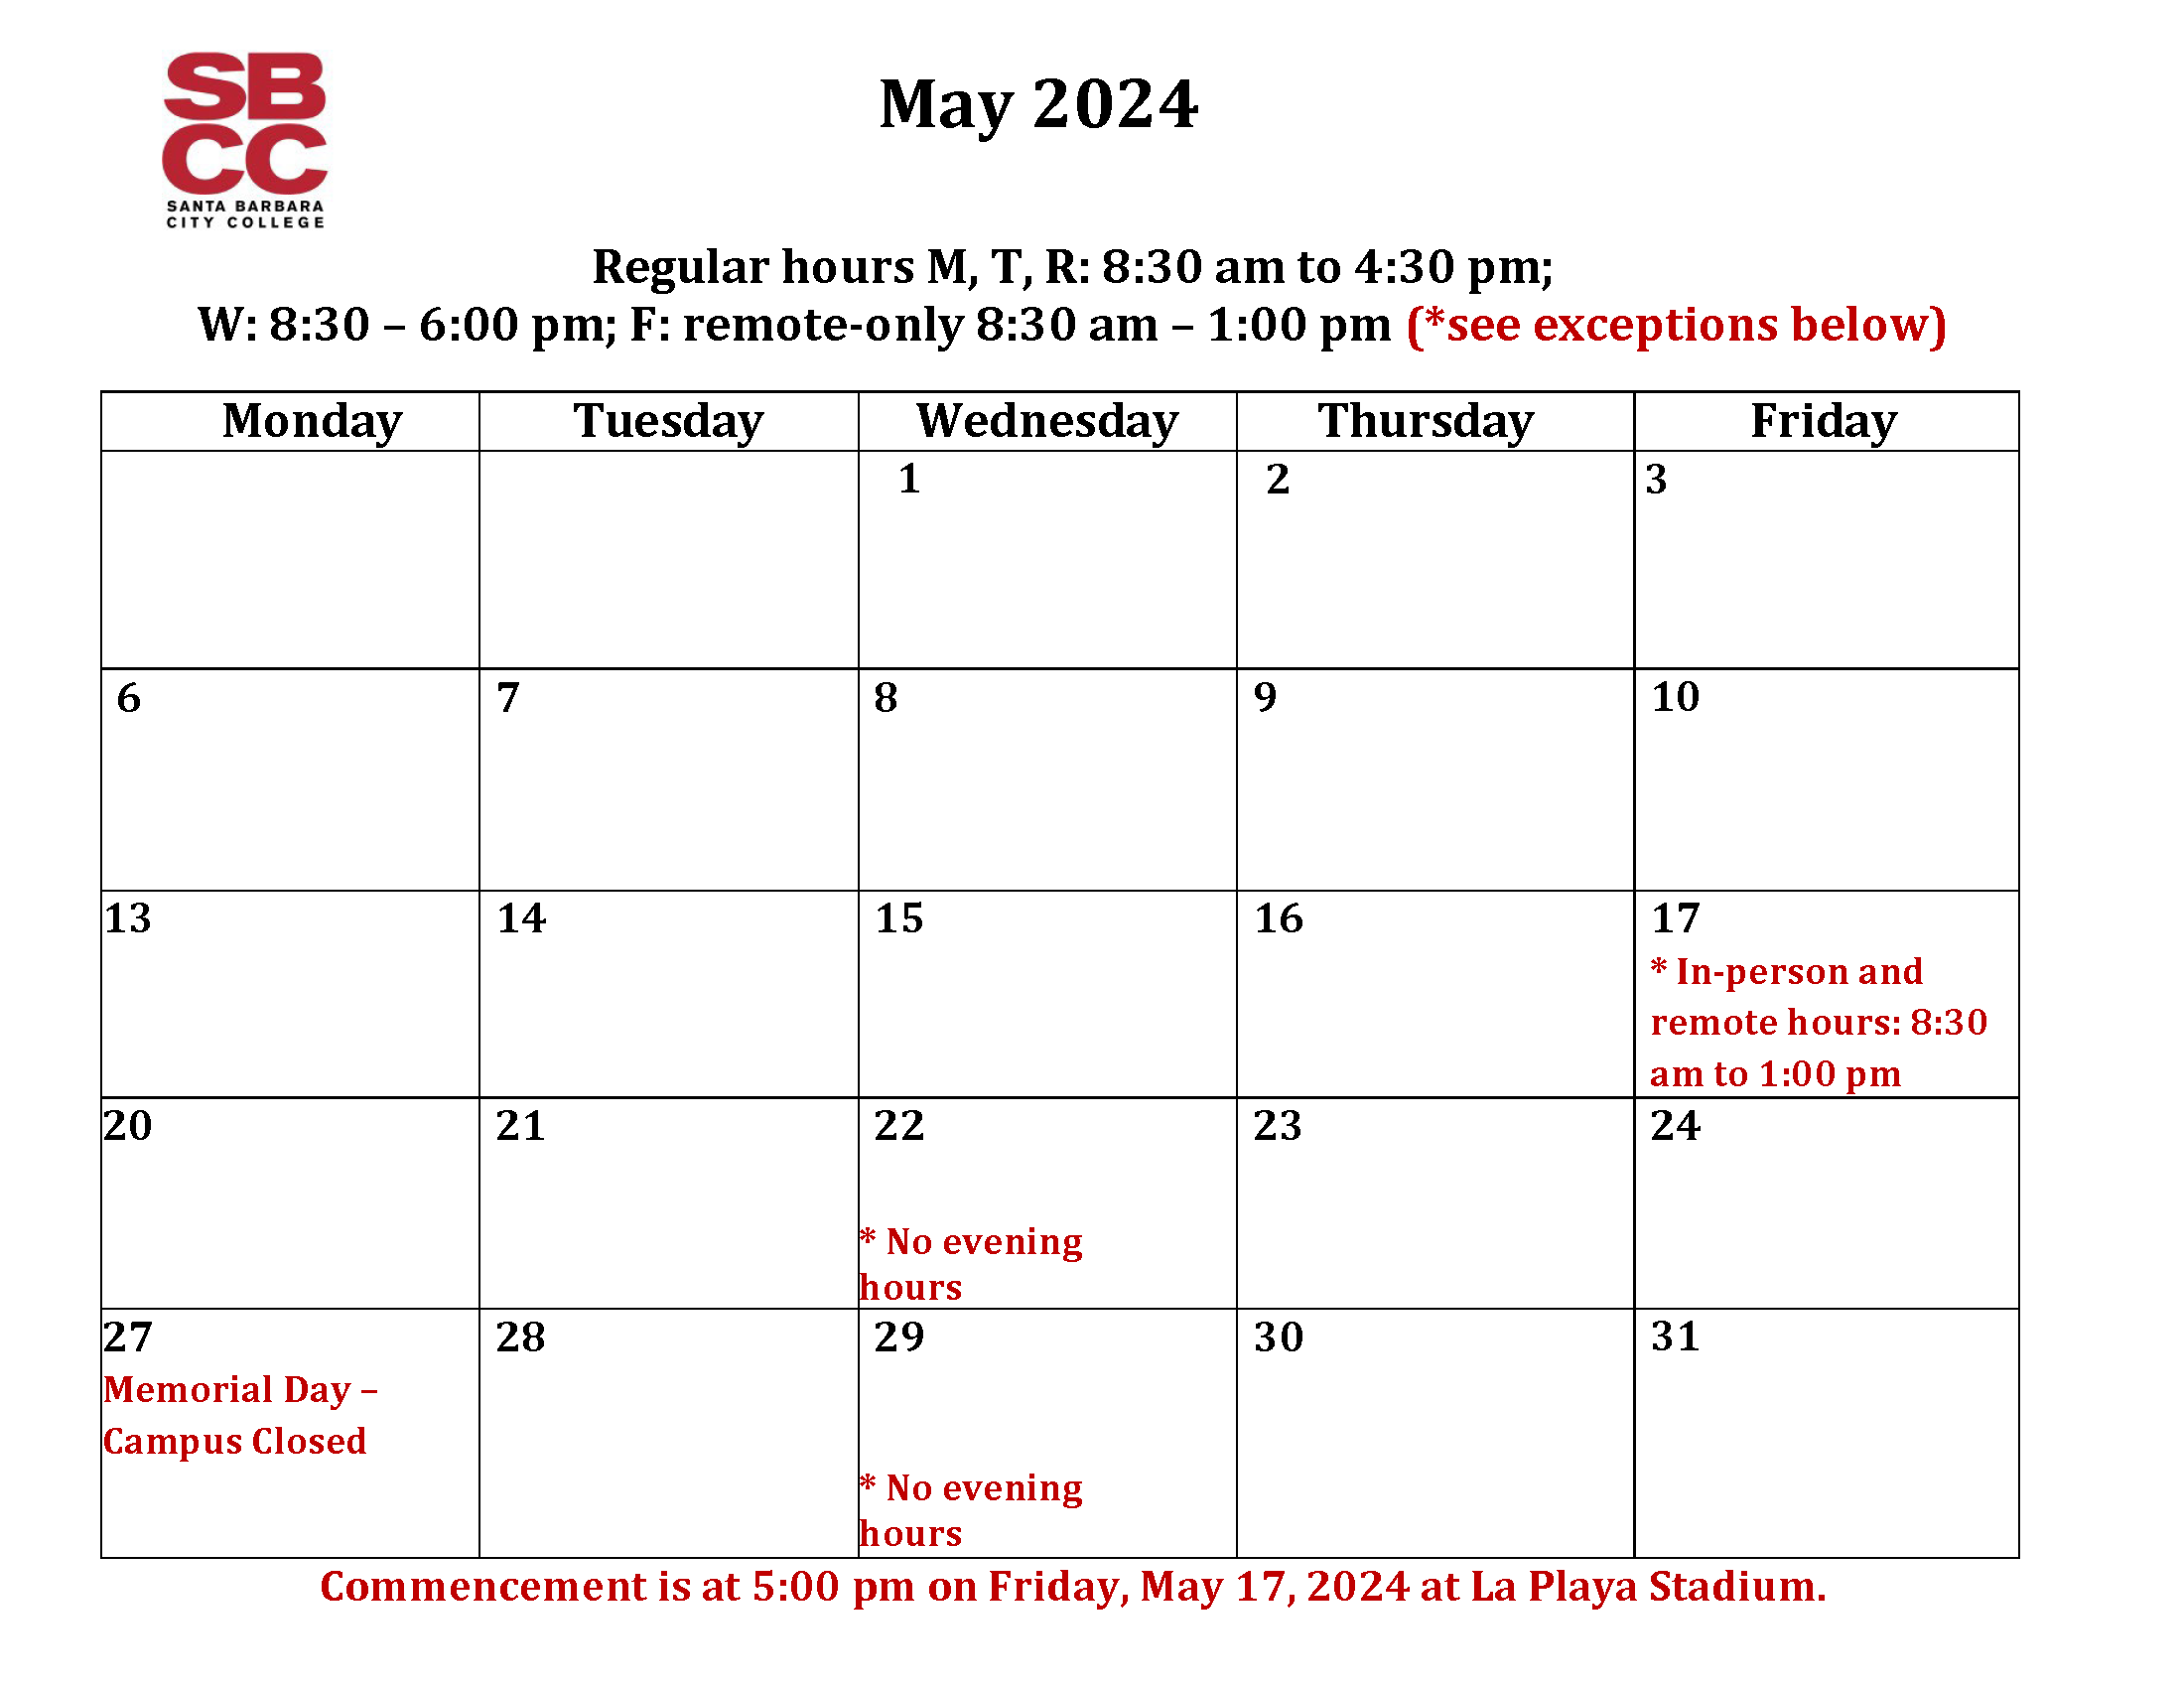 May 2024 student services hours - click for PDF